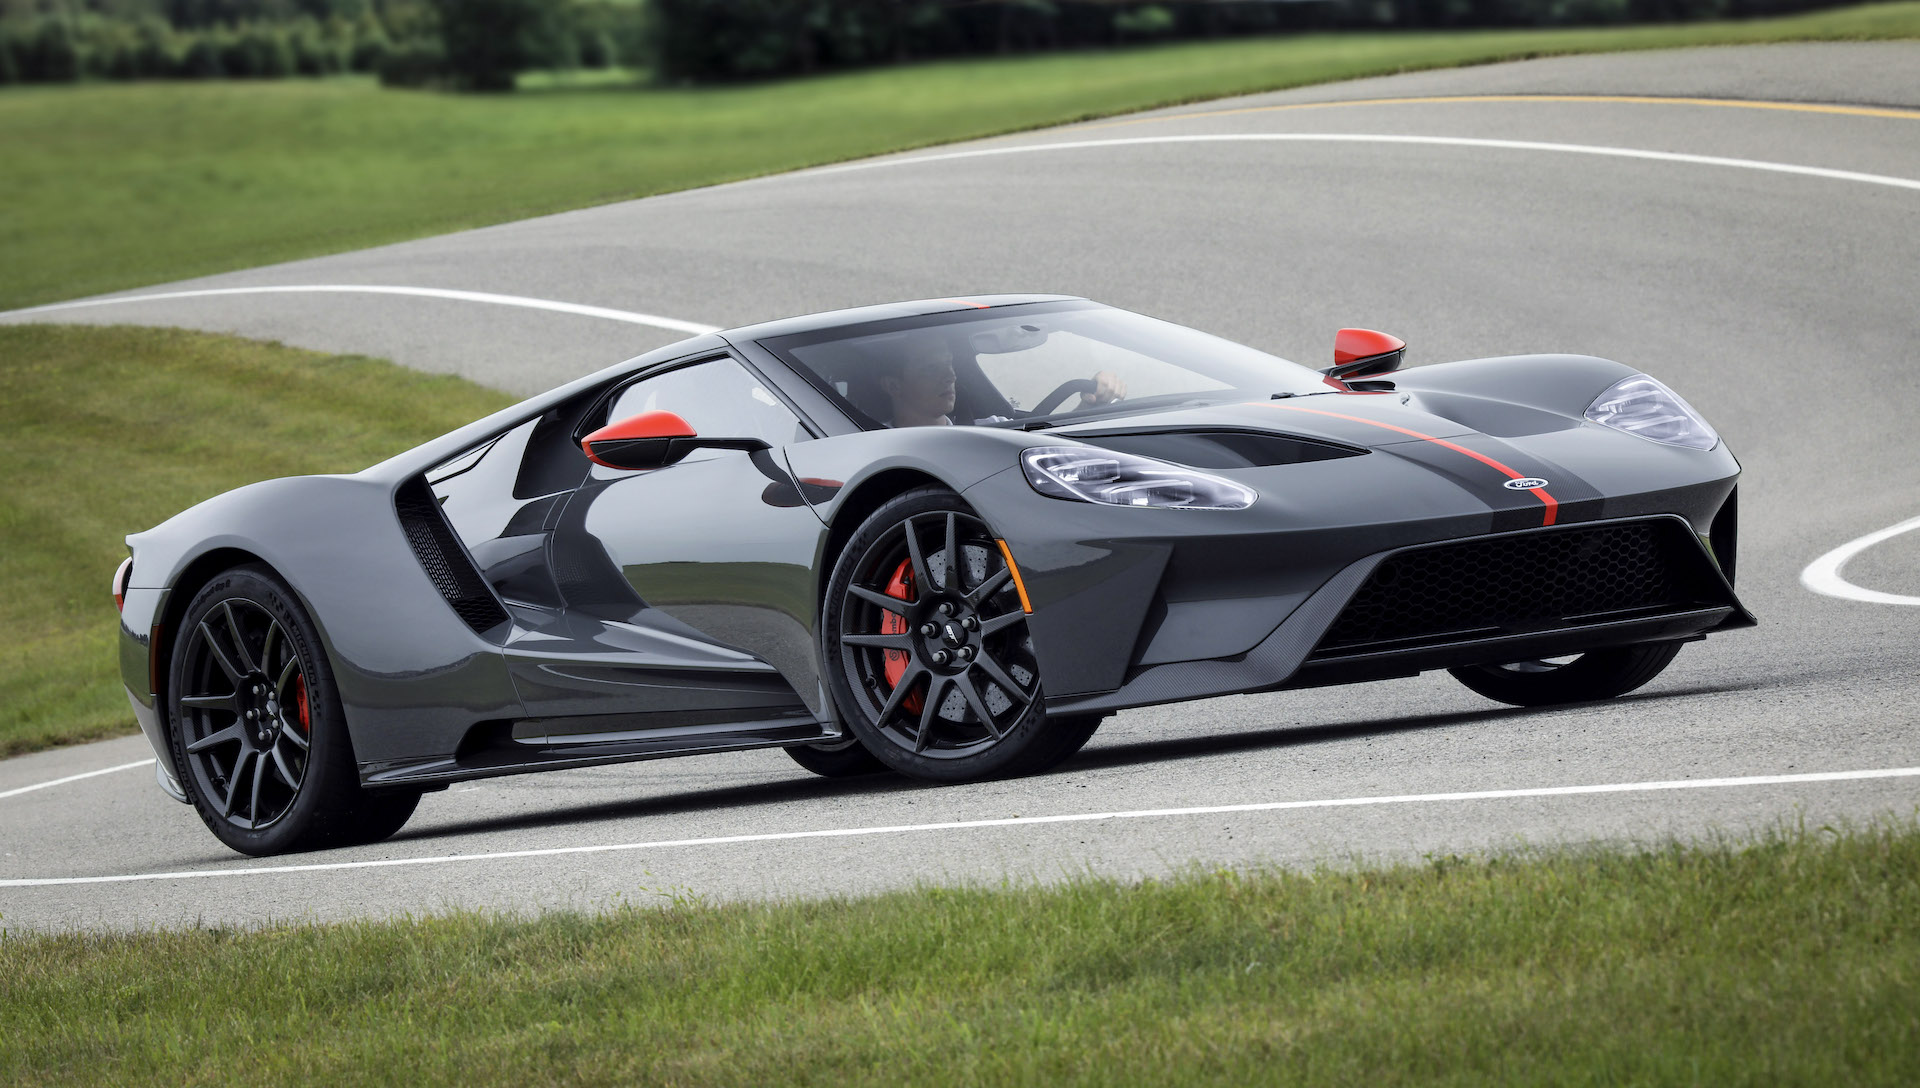 Envision Pasture rysten 2019 Ford GT adds lightweight Carbon Series, gets $50,000 price bump